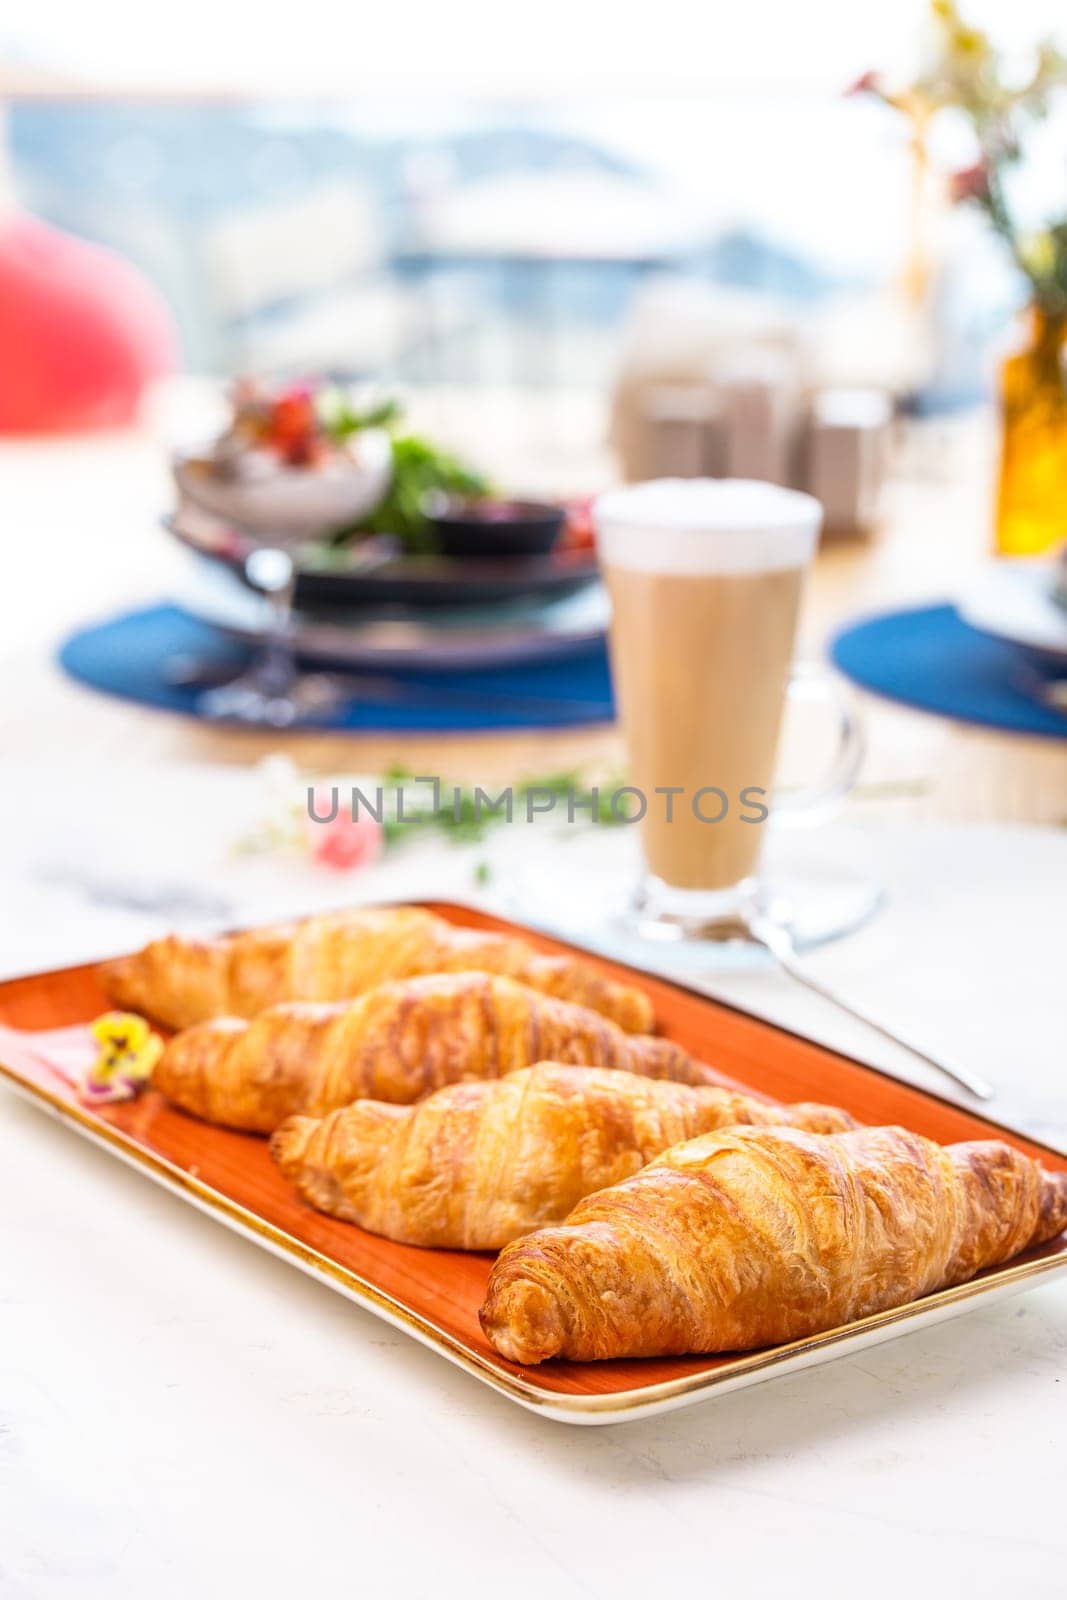 A delightful breakfast with croissants and coffee on a marble table. Croissants are golden brown on an orange plate, coffee with froth.